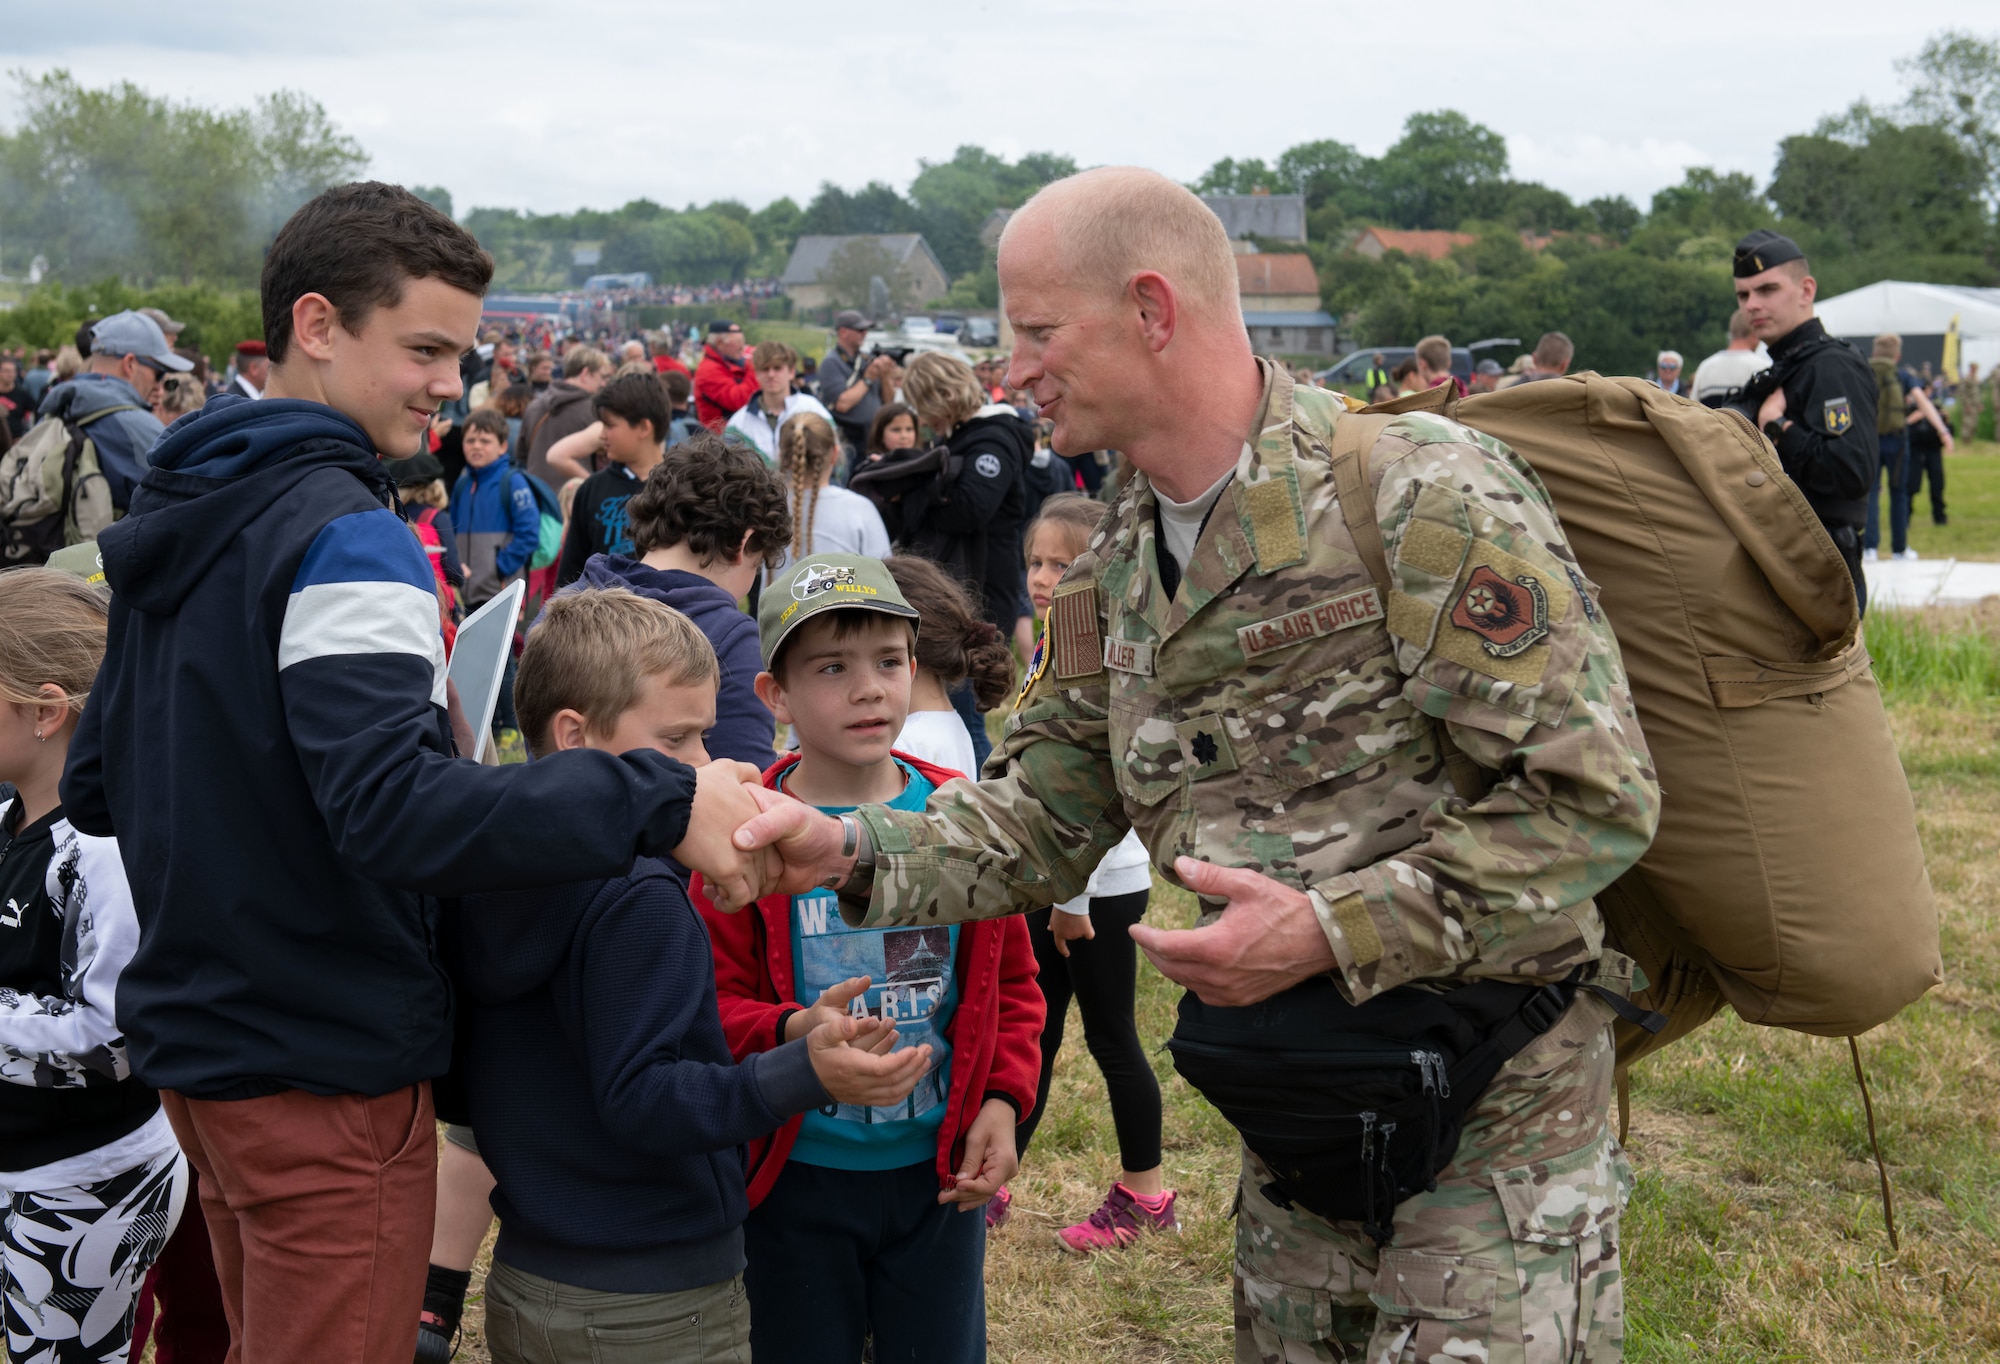 U.S. Air Force Lt. Col. Jake Miller, 752nd Special Operations Group deputy commander, greets local children at the D-Day 75 Commemorative Airborne Operation in Sainte-Mere-Eglise, France, June 9, 2019. This commemorative airborne operation was an opportunity for multinational forces to honor the past and simultaneously work to secure the future. Training together in the very same place that trans-Atlantic resolve began 75 years ago demonstrates the partnerships and bonds that we highly value and continue to benefit from to this day. (U.S. Air Force photo by Airman 1st Class Jennifer Zima)